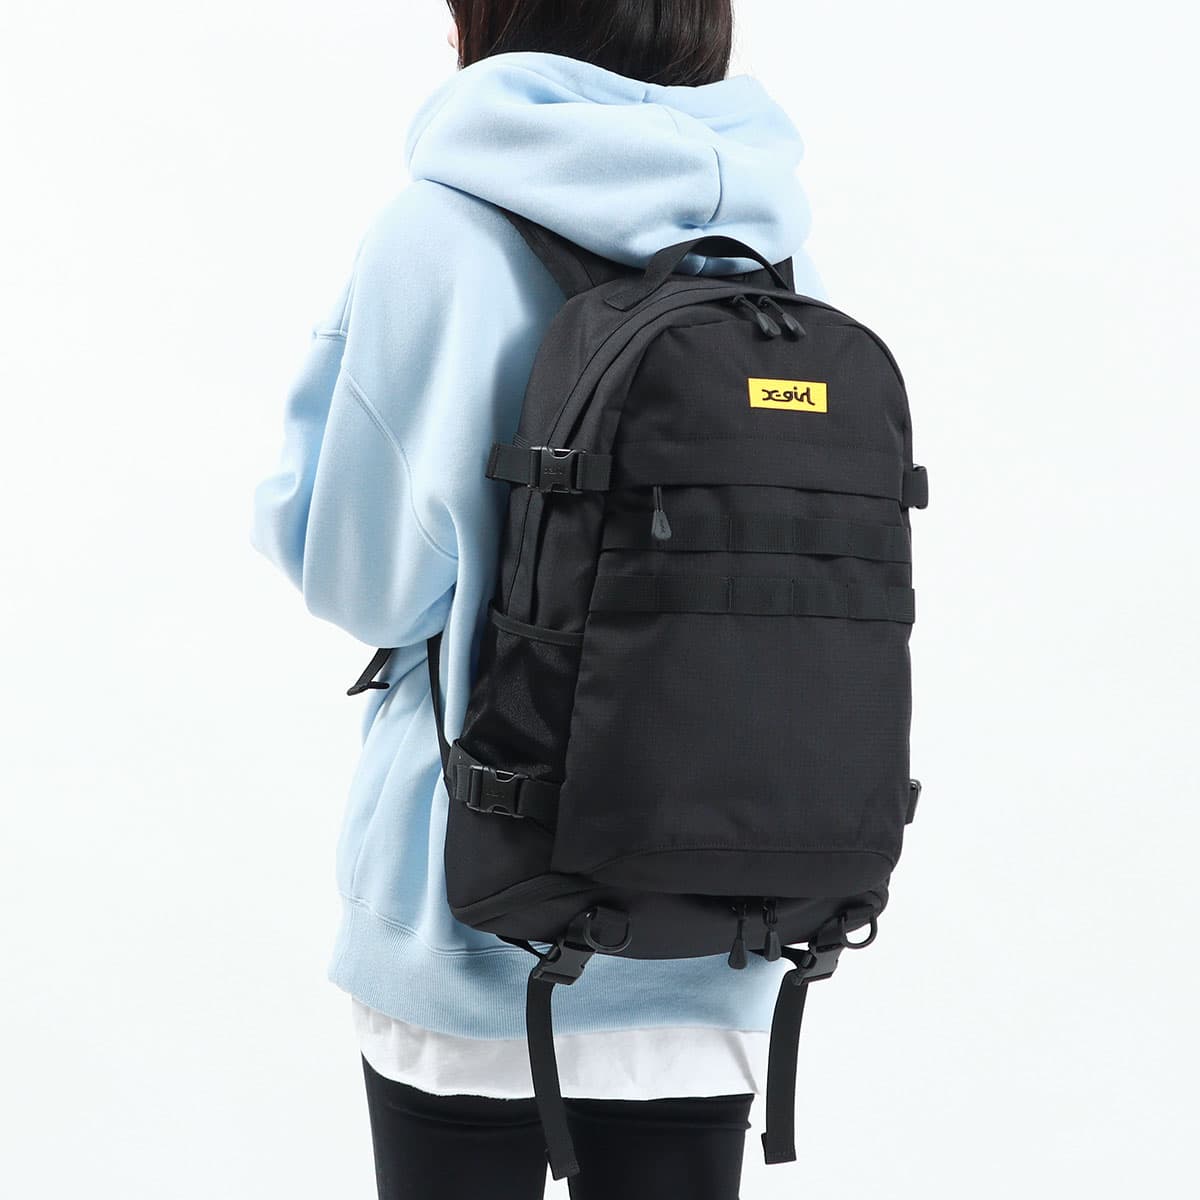 X-girl エックスガール MILLS LOGO ADVENTURE BACKPACK バックパック 29L 105224053010  105225053002